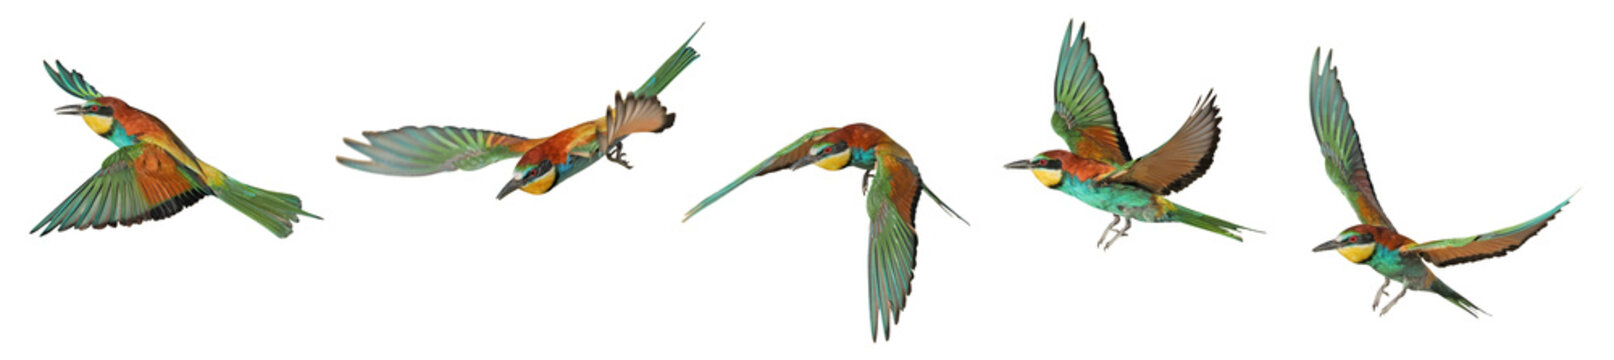 European bee eater in flight (Merops apiaster), PNG, isolated on transparent background